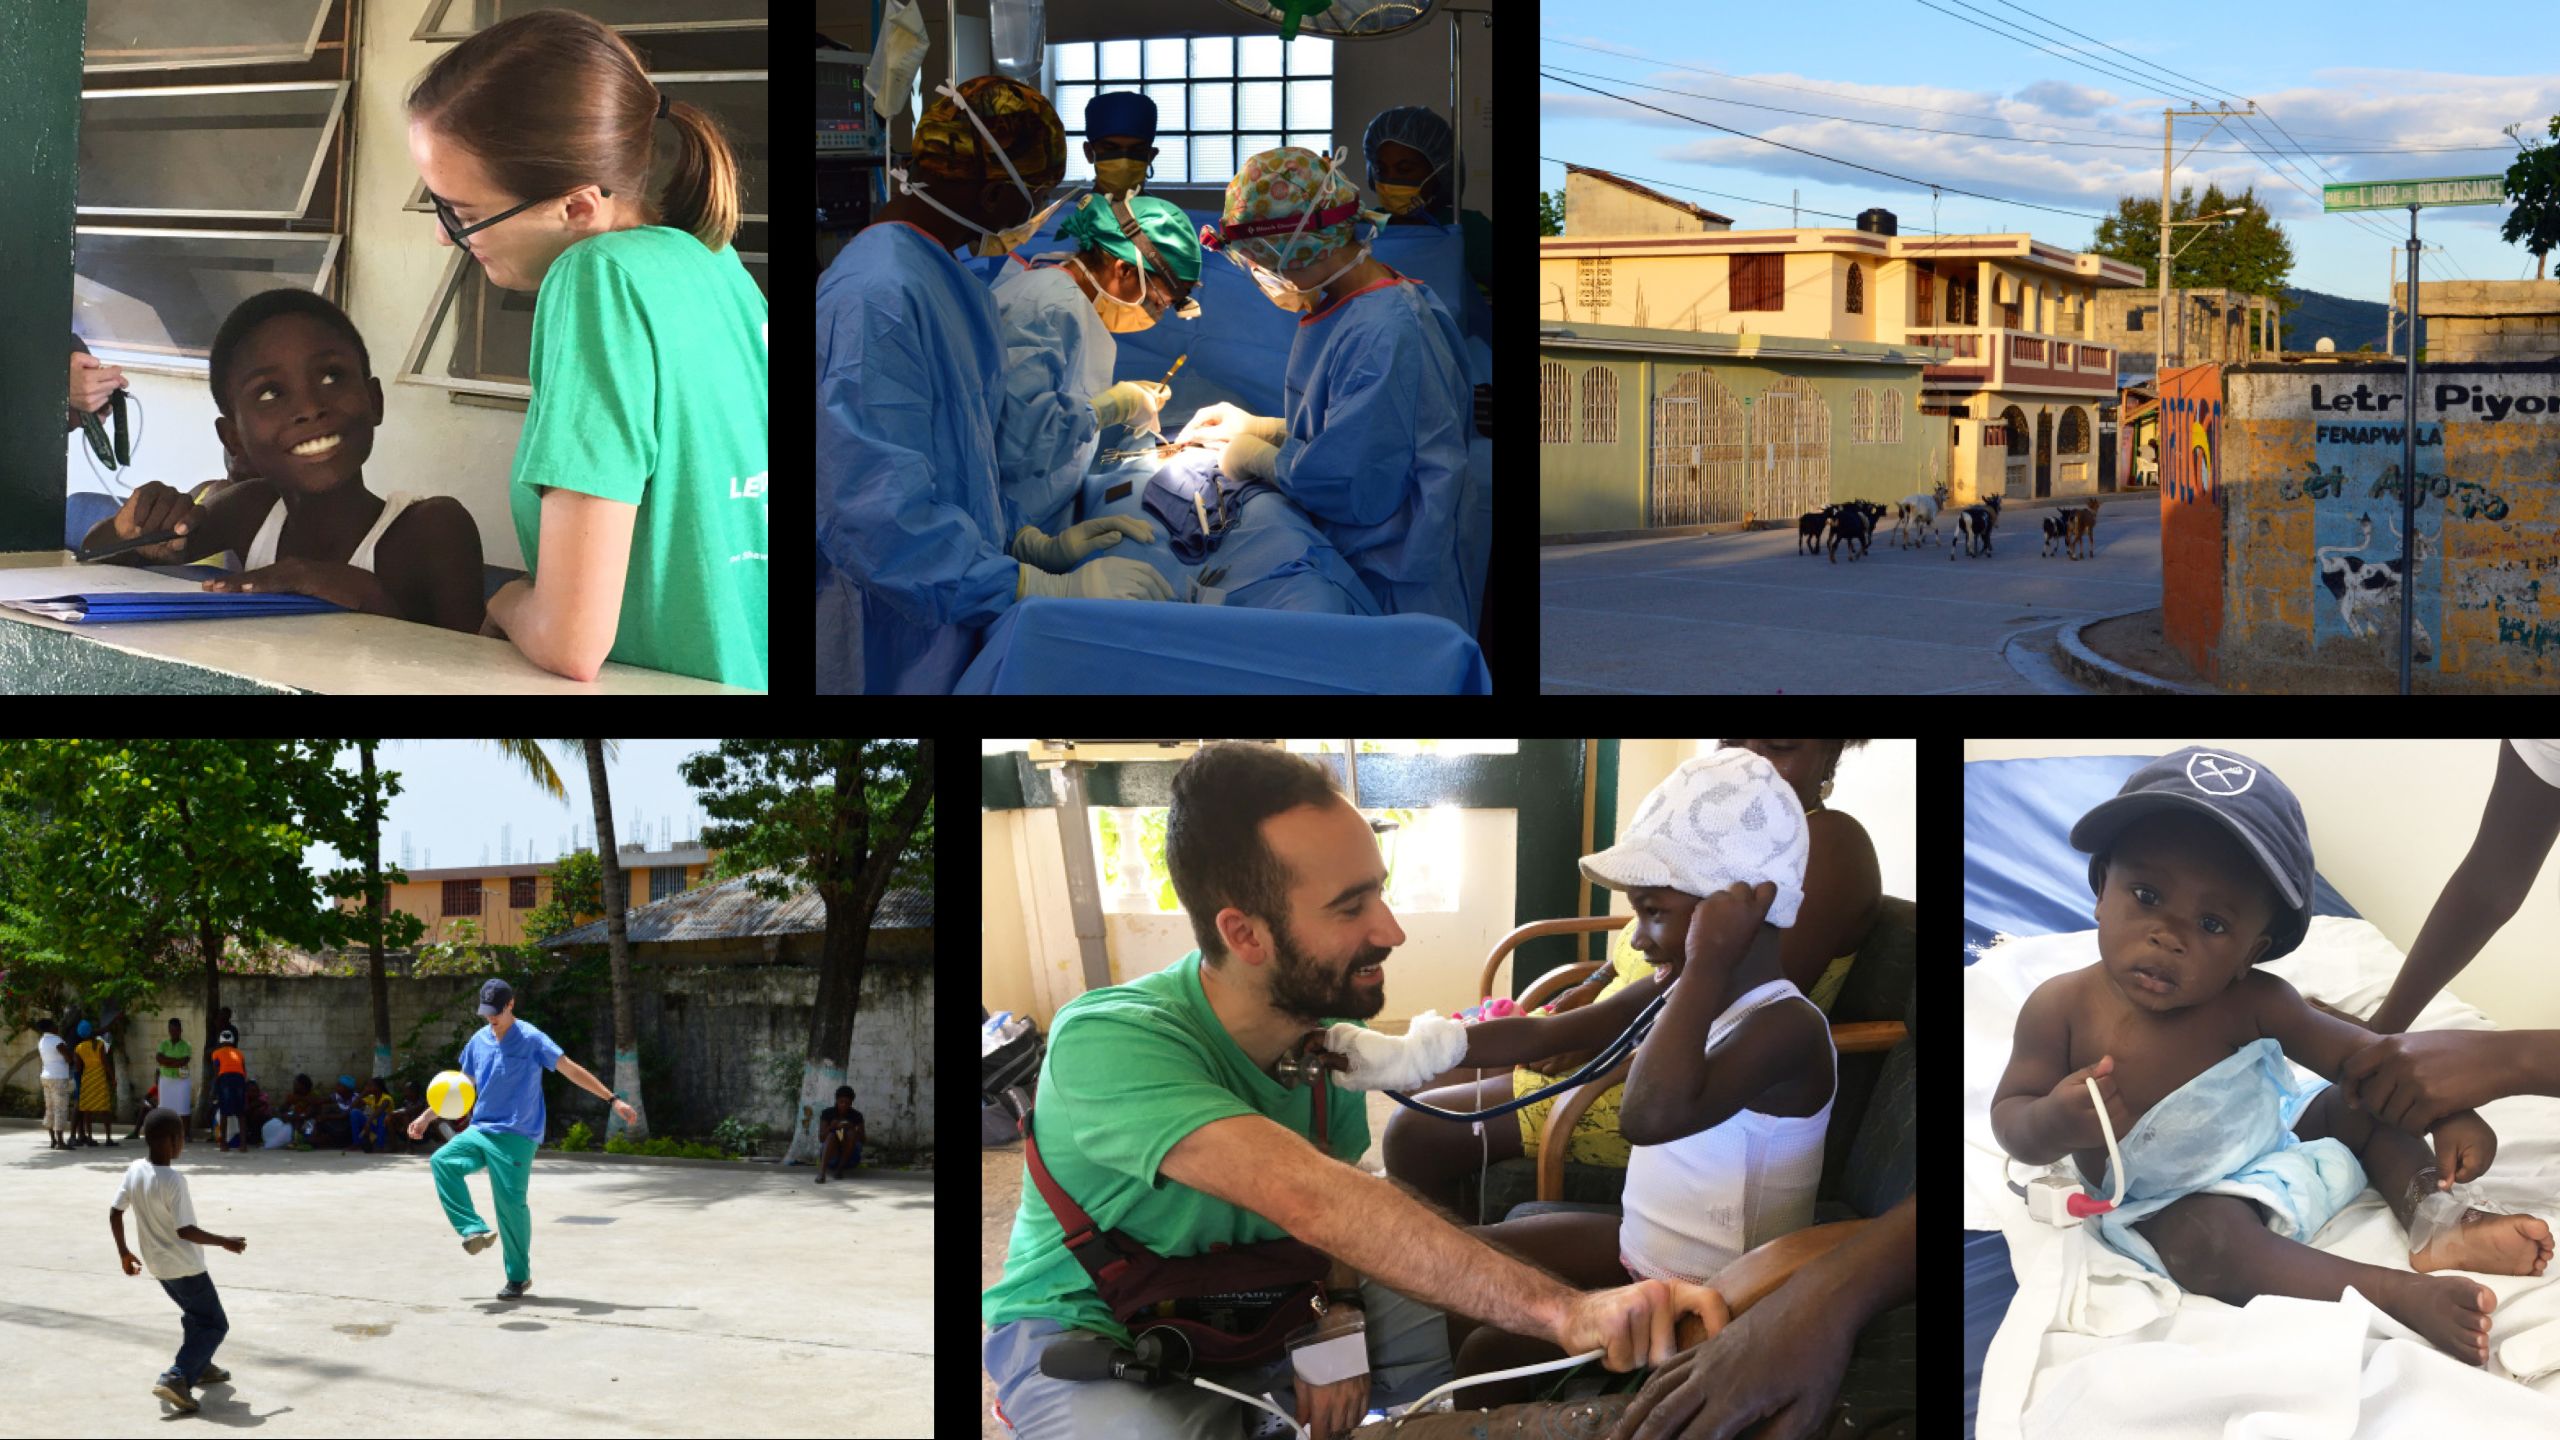 Emory medical volunteers talking with Haitian children, performing operations with headlamps, playing soccer. A scenic shot of a Haitian town with a herd of goats. 